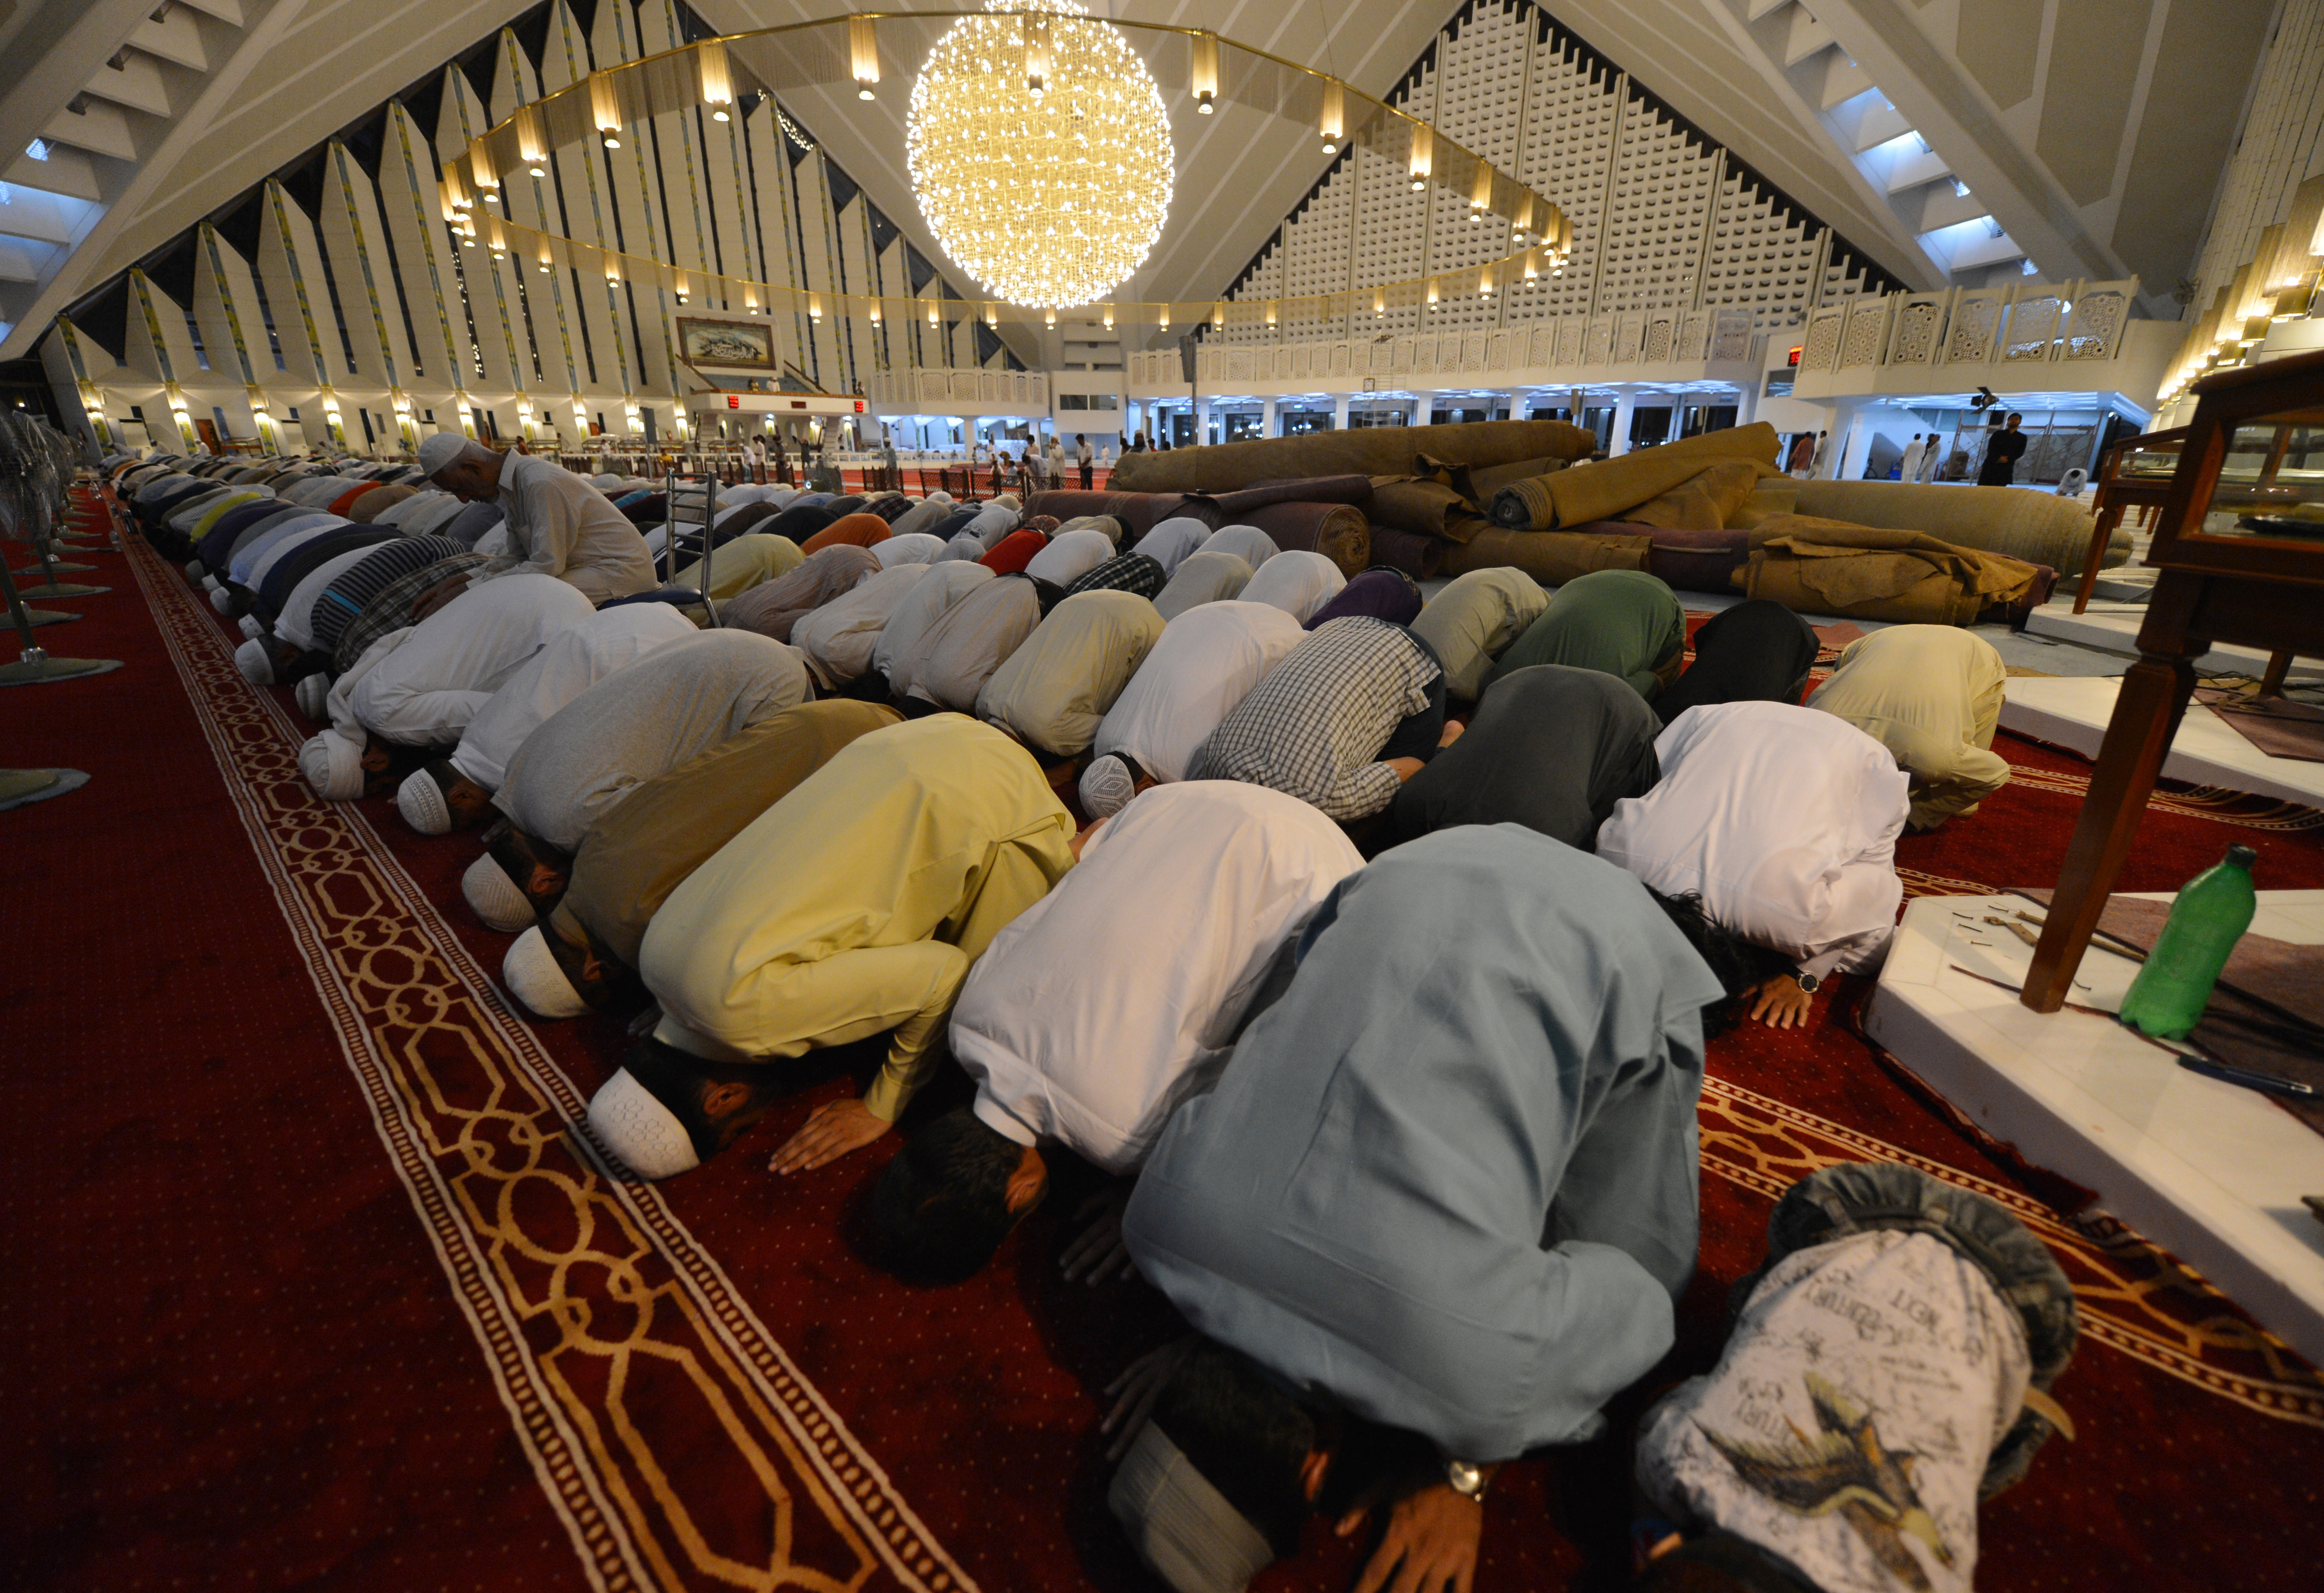 Pakistani Muslims offer a special evening prayer "Taraweeh' on the first night of the holy month of Ramadan at the grand Faisal Mosque in Islamabad on July 10, 2013. (AAMIR QURESHI&mdash;AFP/Getty Images)